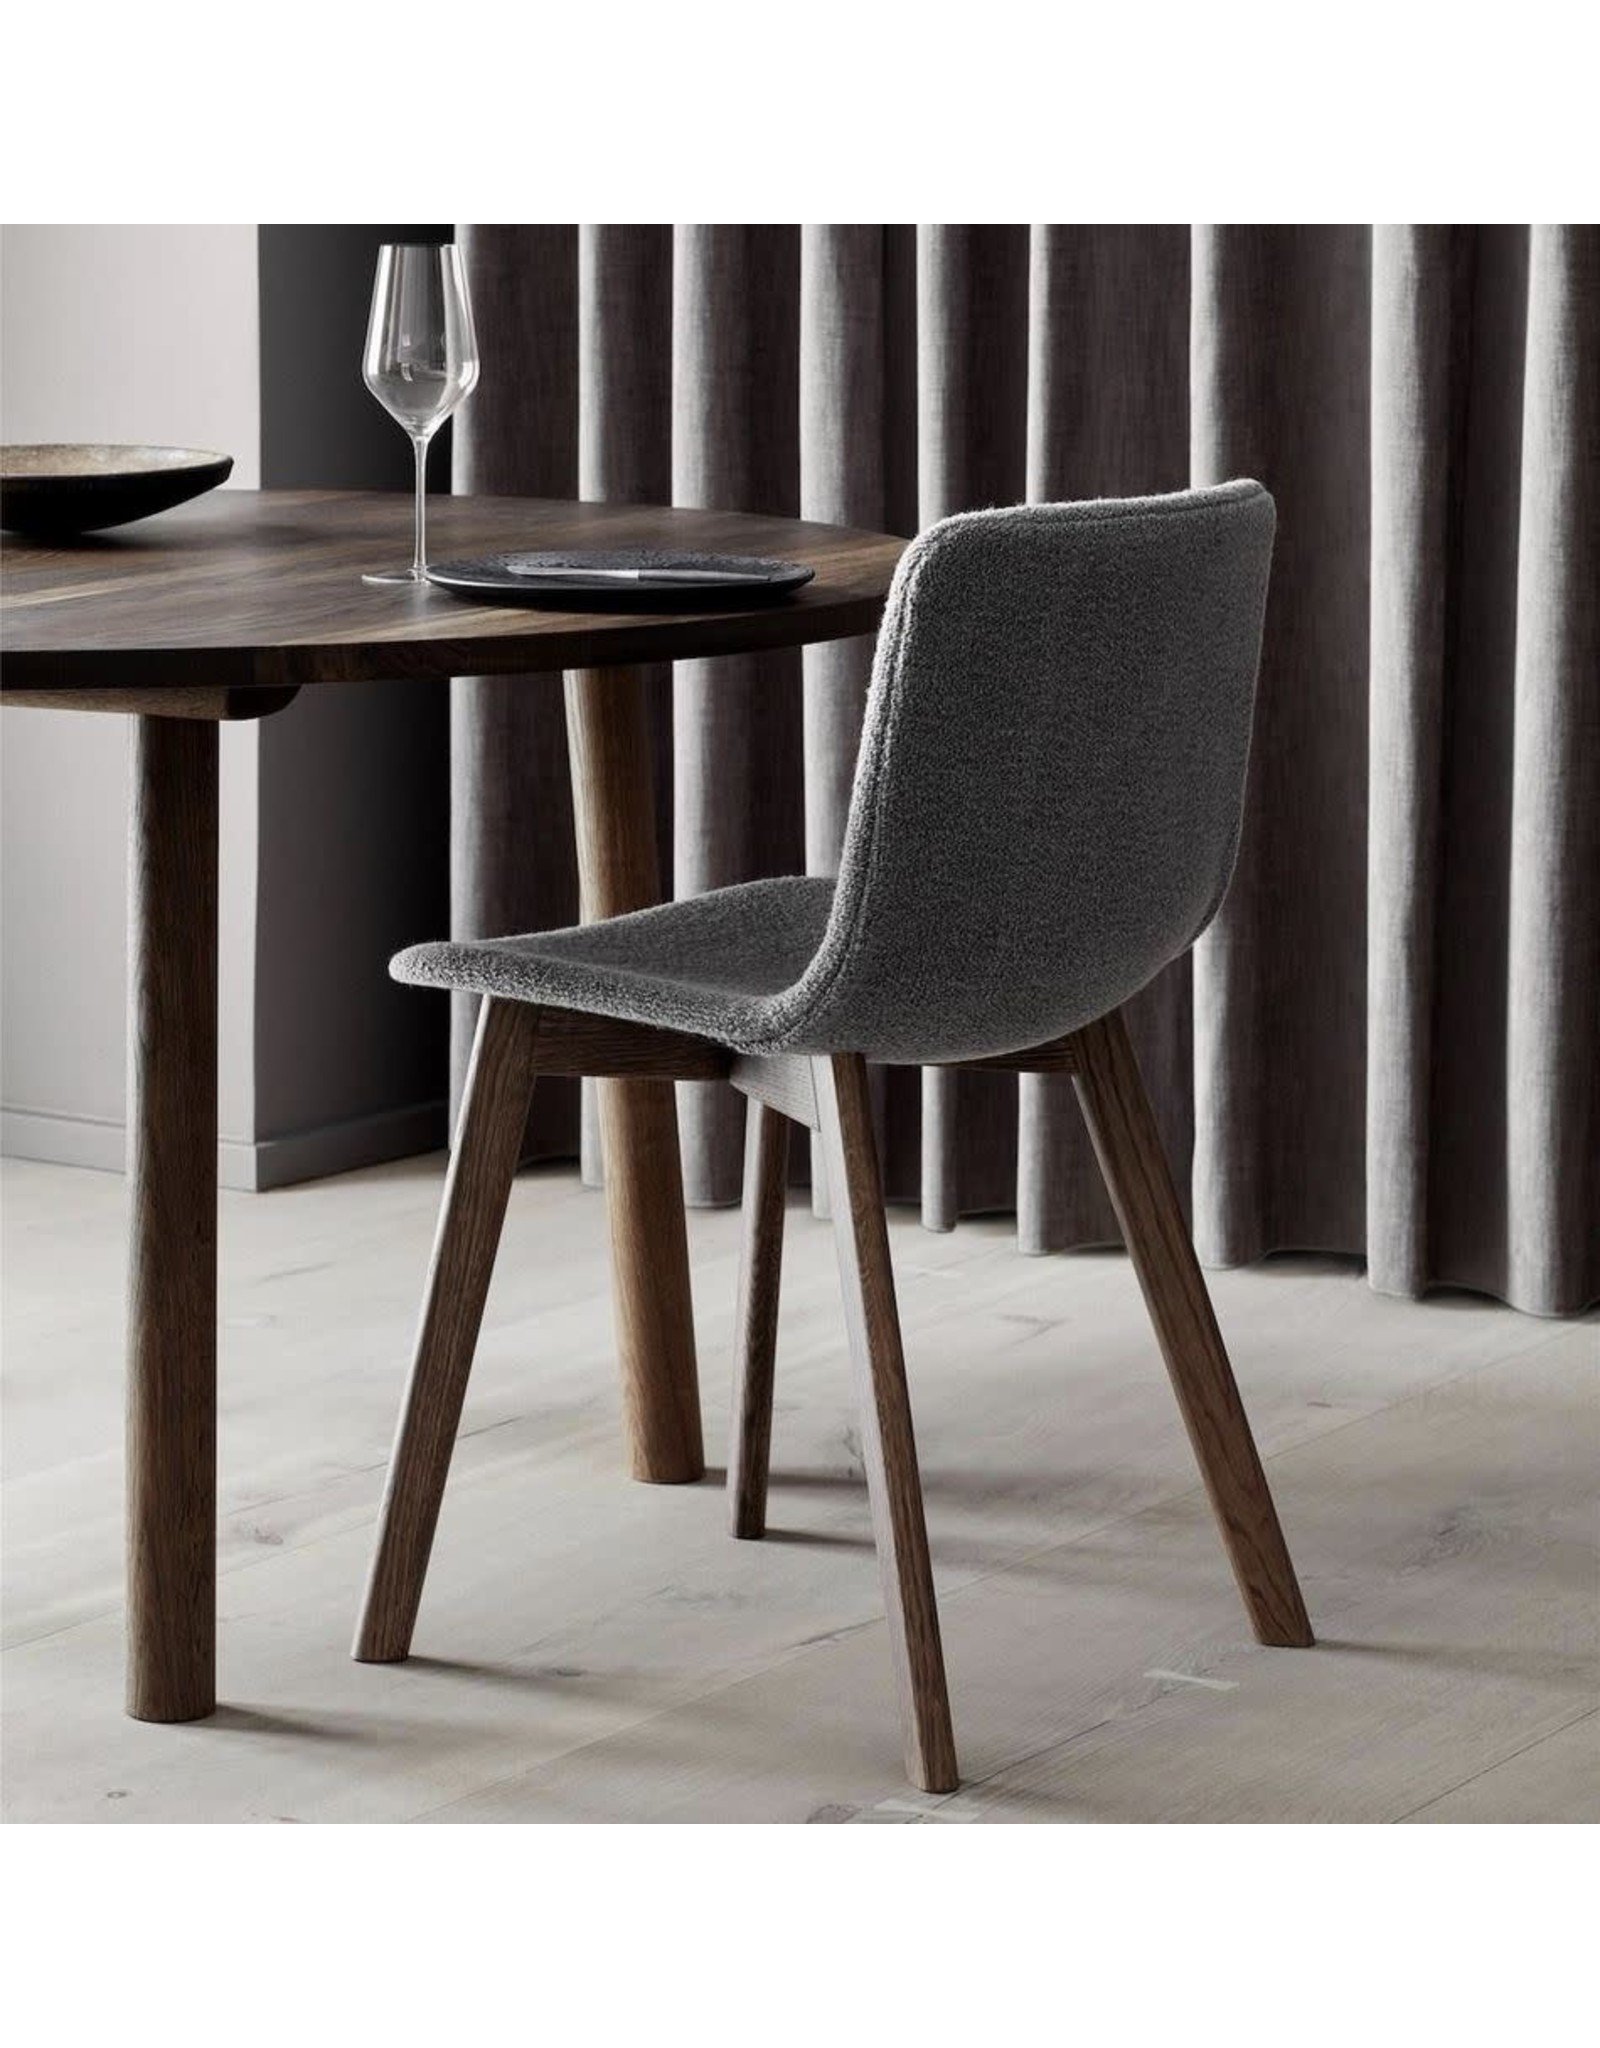 4222 PATO WOOD CHAIR IN GREY FABRIC